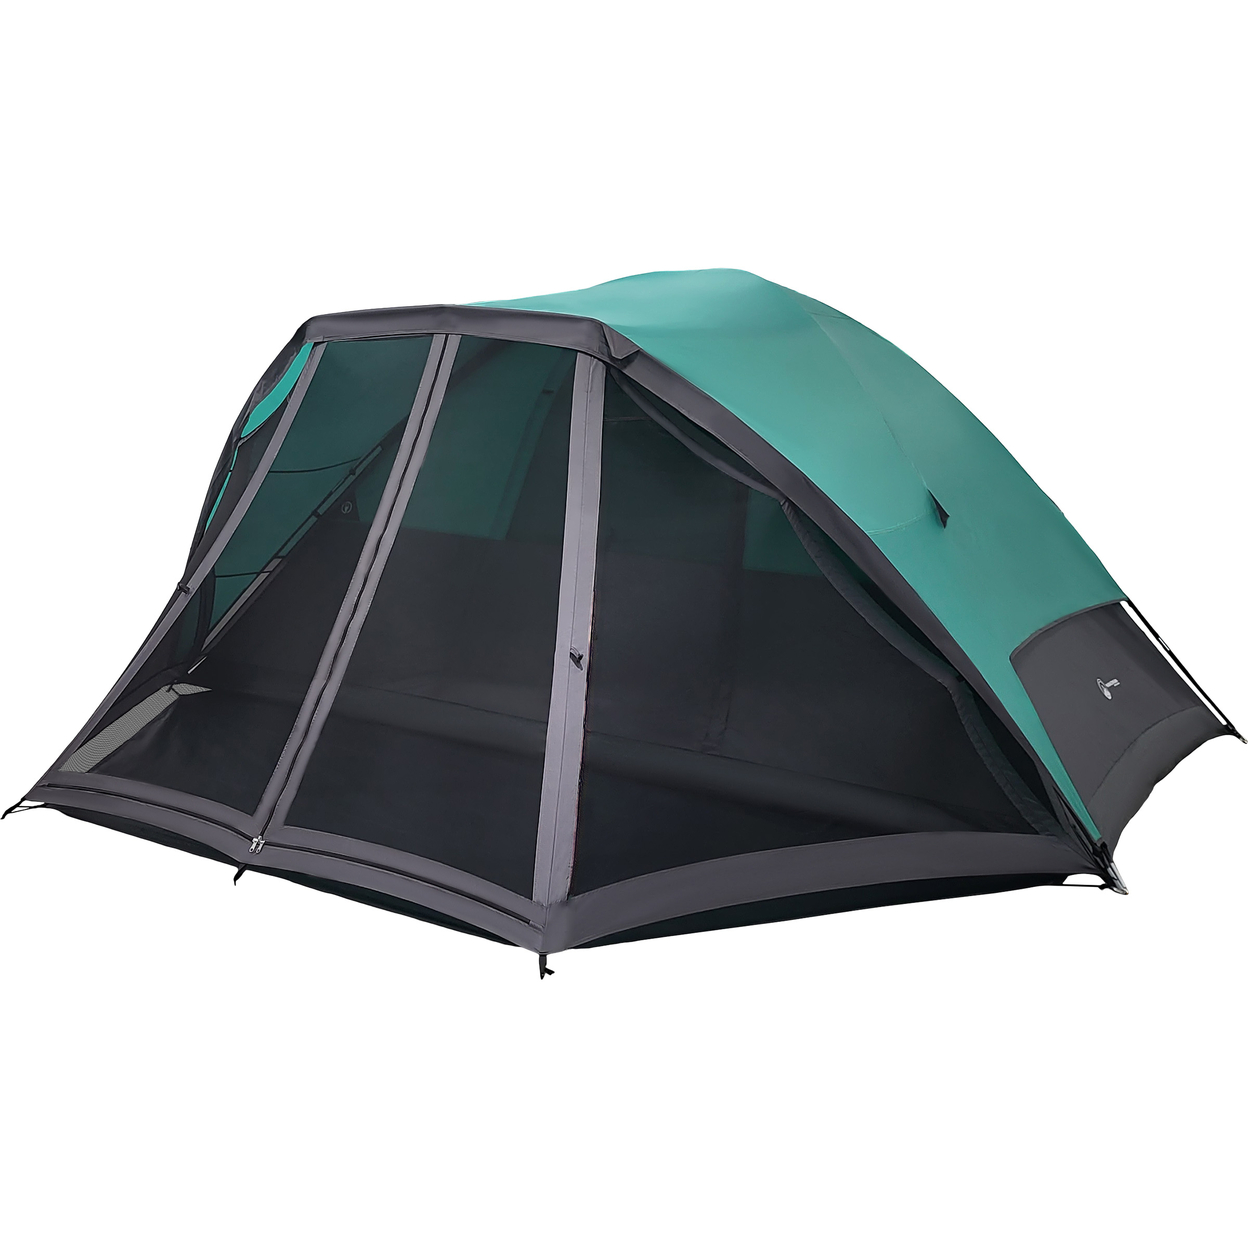 6 Person Camping Tent Cabin Style Outdoor Shelter Screen Tent Carrying Bag Teal